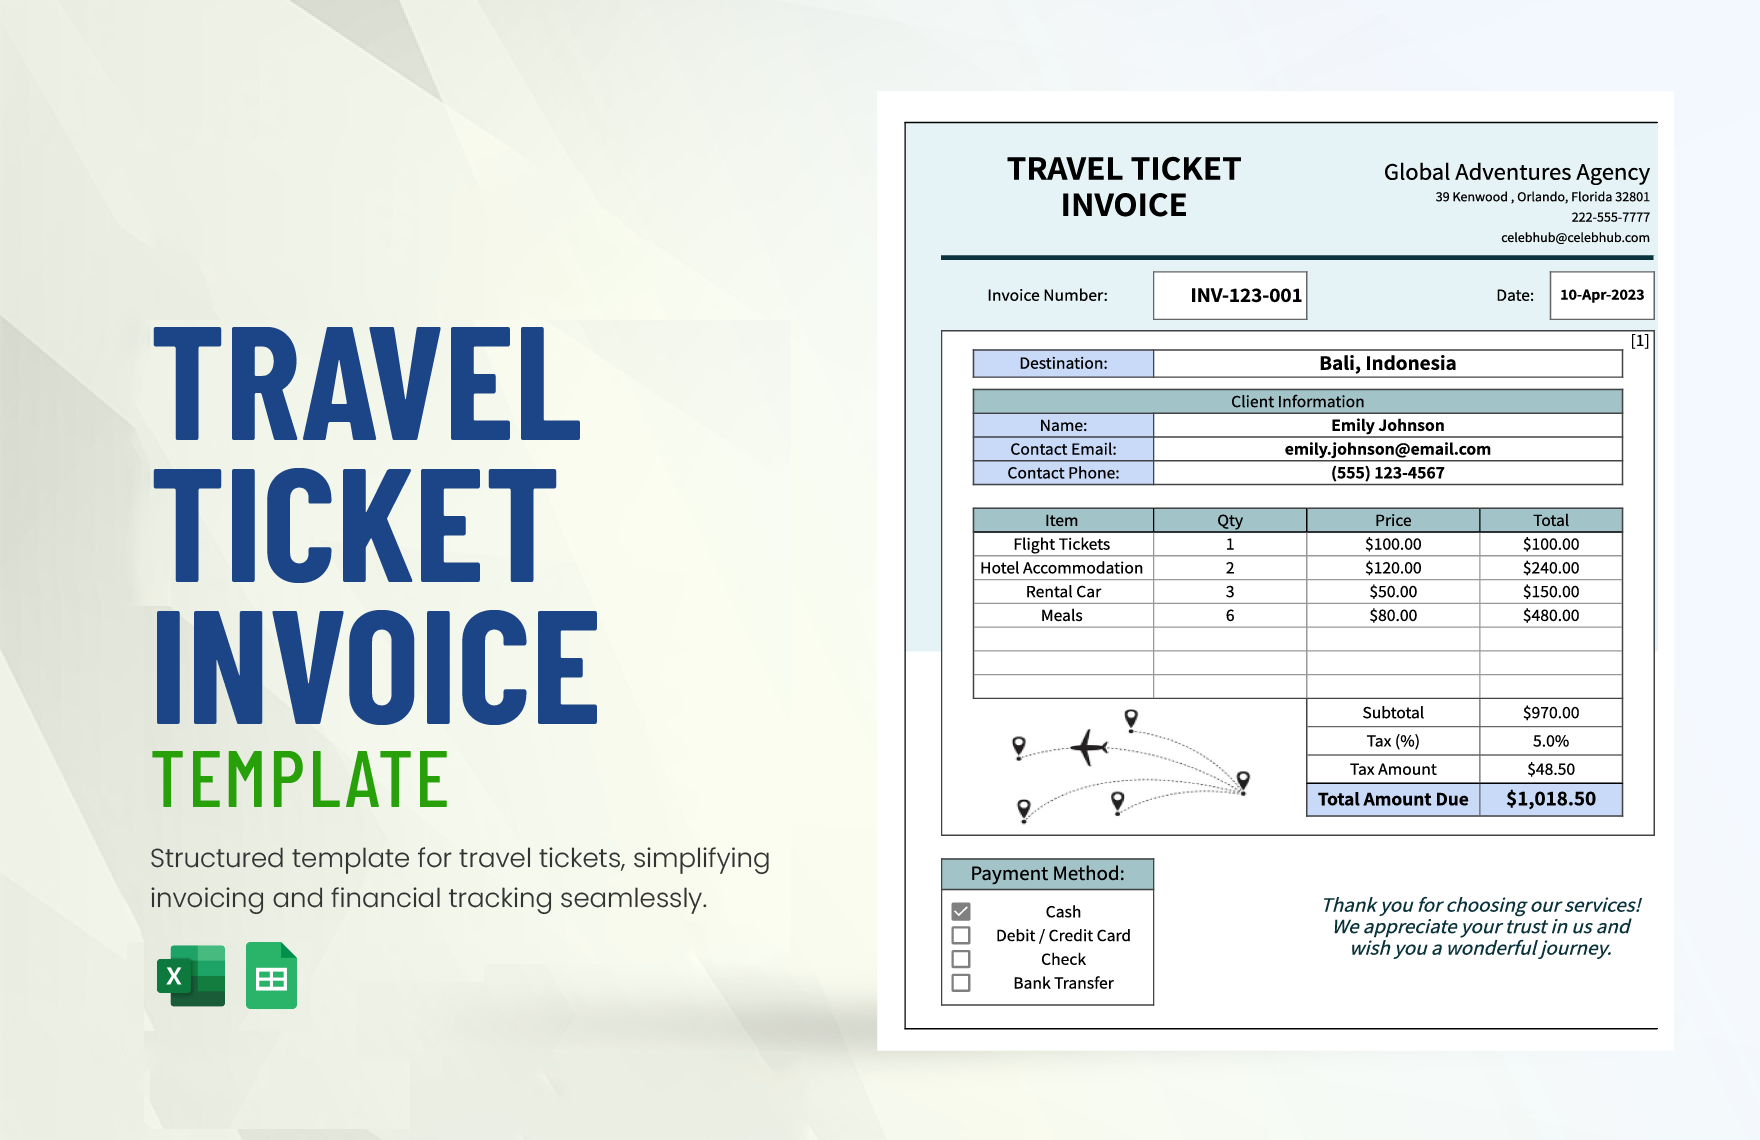 Travel Ticket Invoice Template in Excel, Google Sheets